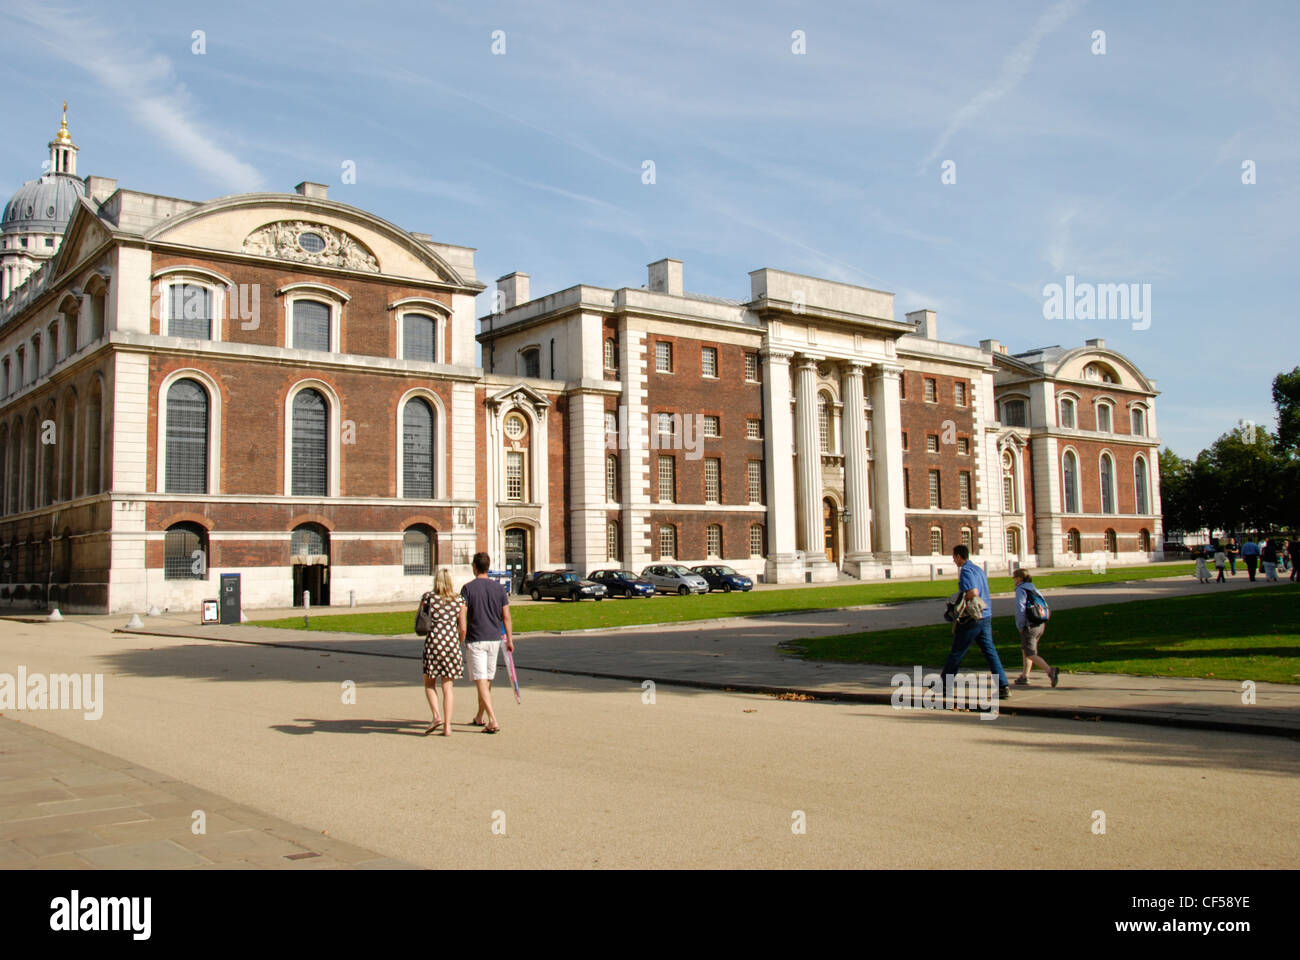 Exterieur des Old Royal Naval College in Greenwich. Stockfoto